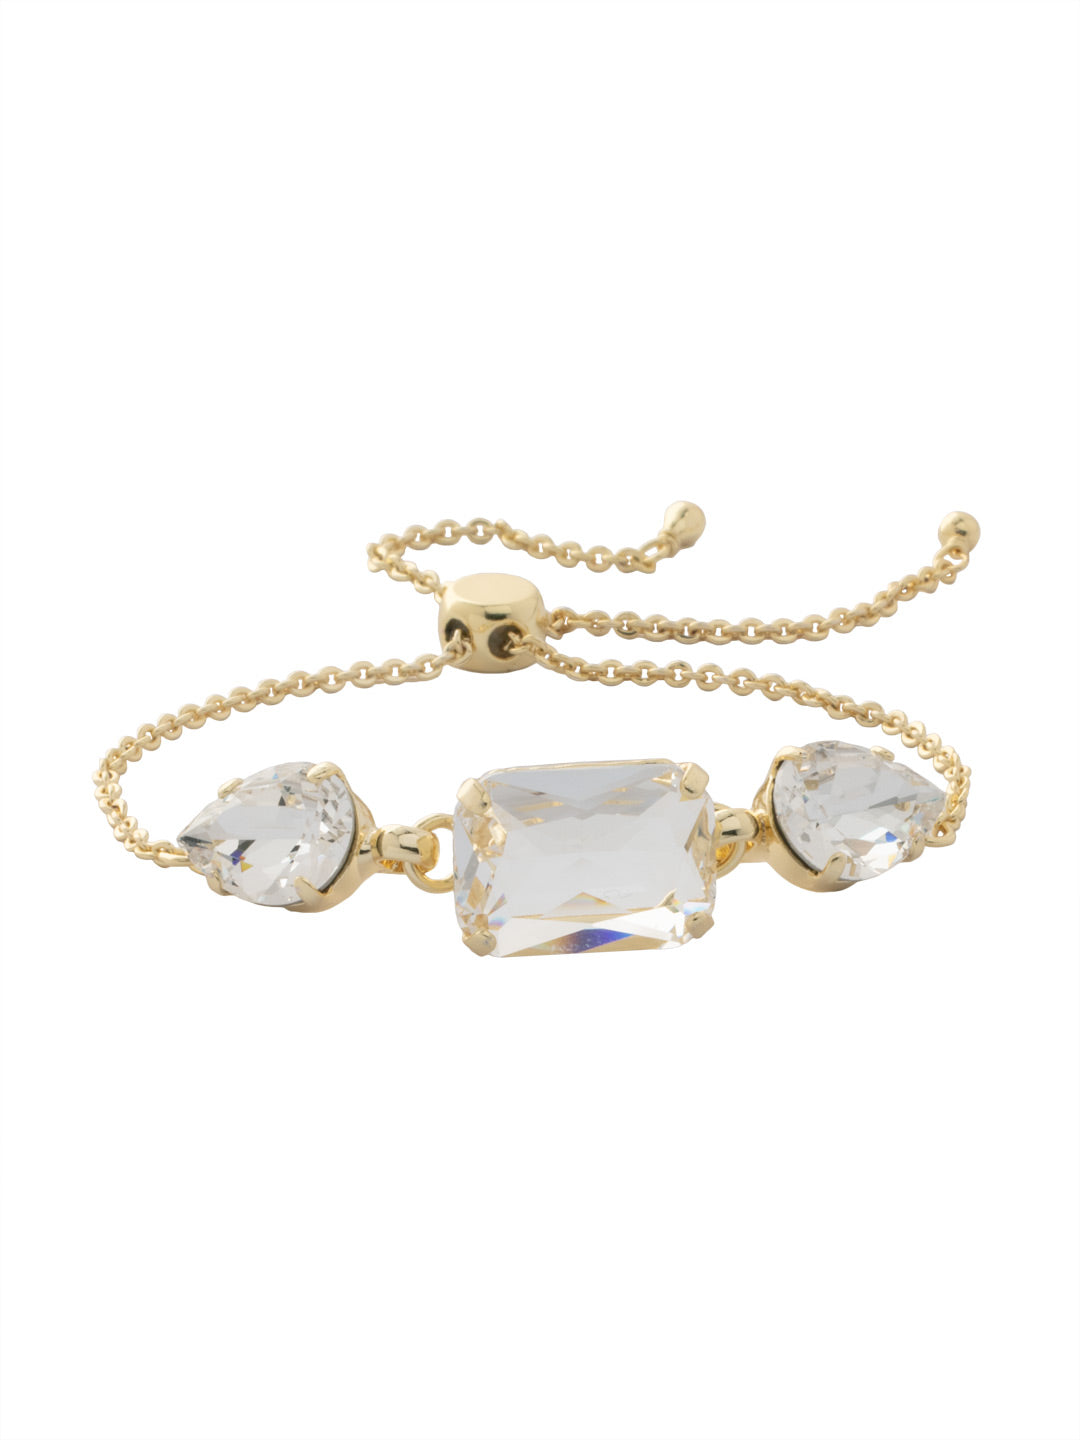 Celandine Slider Bracelet - BFG5BGCRY - <p>The Celandine Slider Bracelet features an emerald cut crystal surrounded by a single pear cut crystal on either side. From Sorrelli's Crystal collection in our Bright Gold-tone finish.</p>